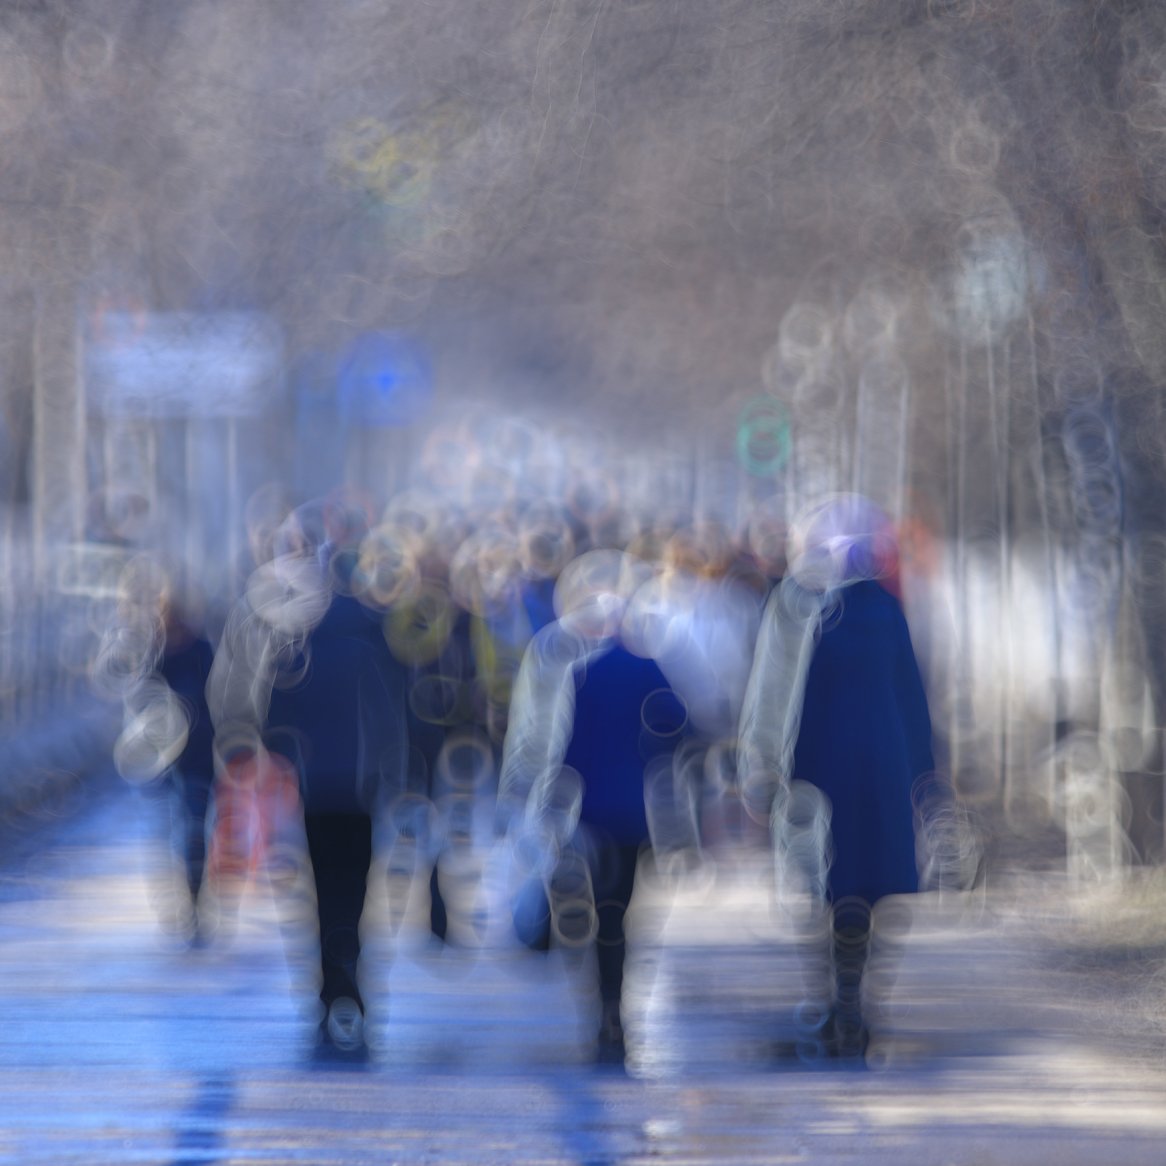 Blurred image of people walking down a road